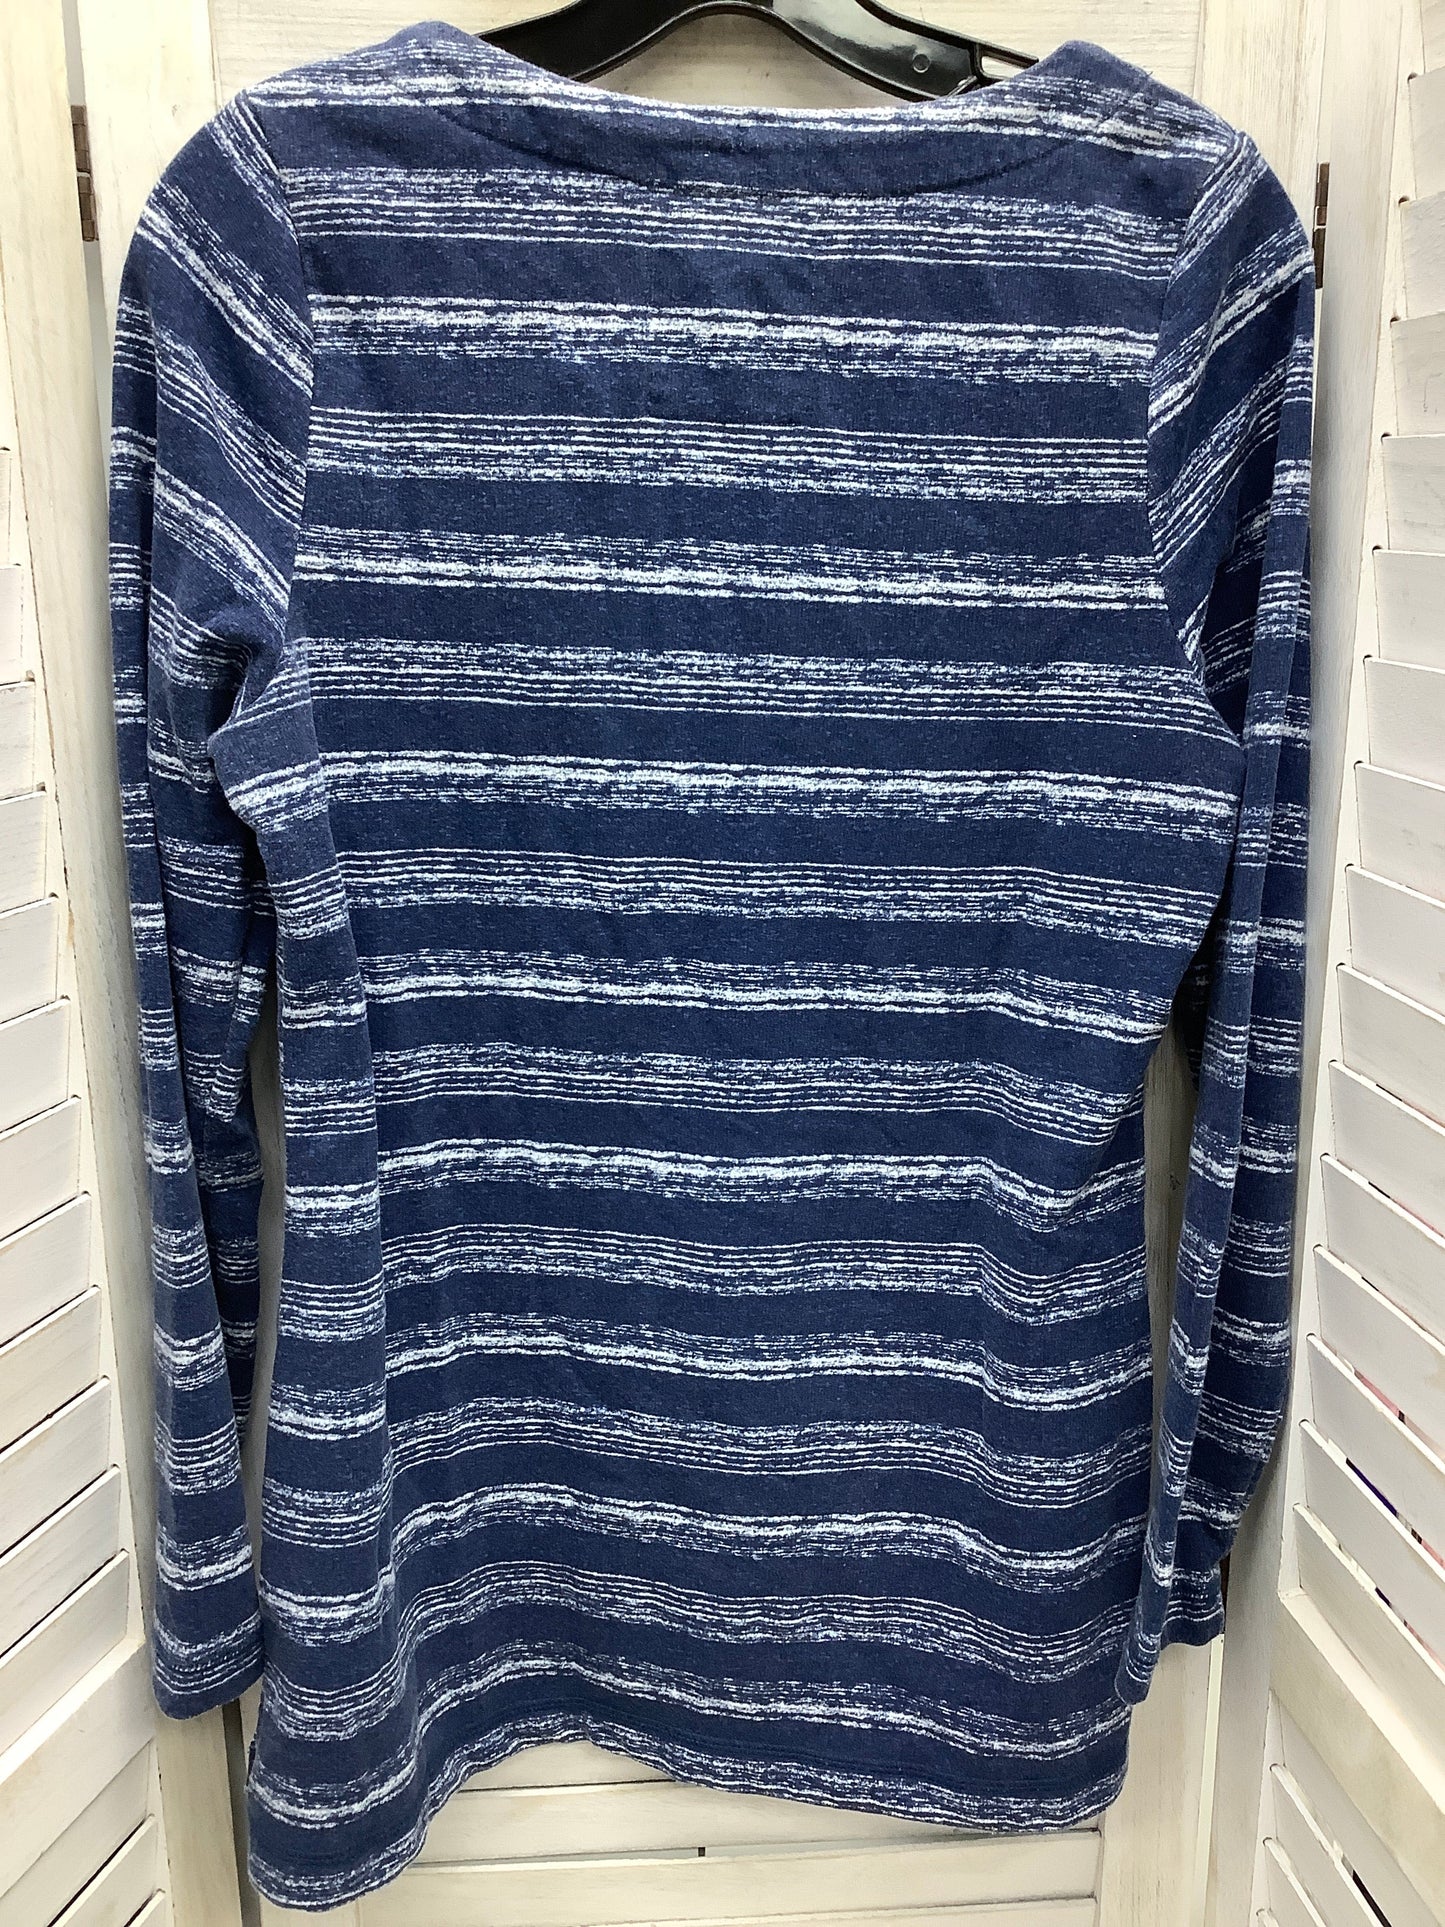 Striped Pattern Top Long Sleeve Sonoma, Size S